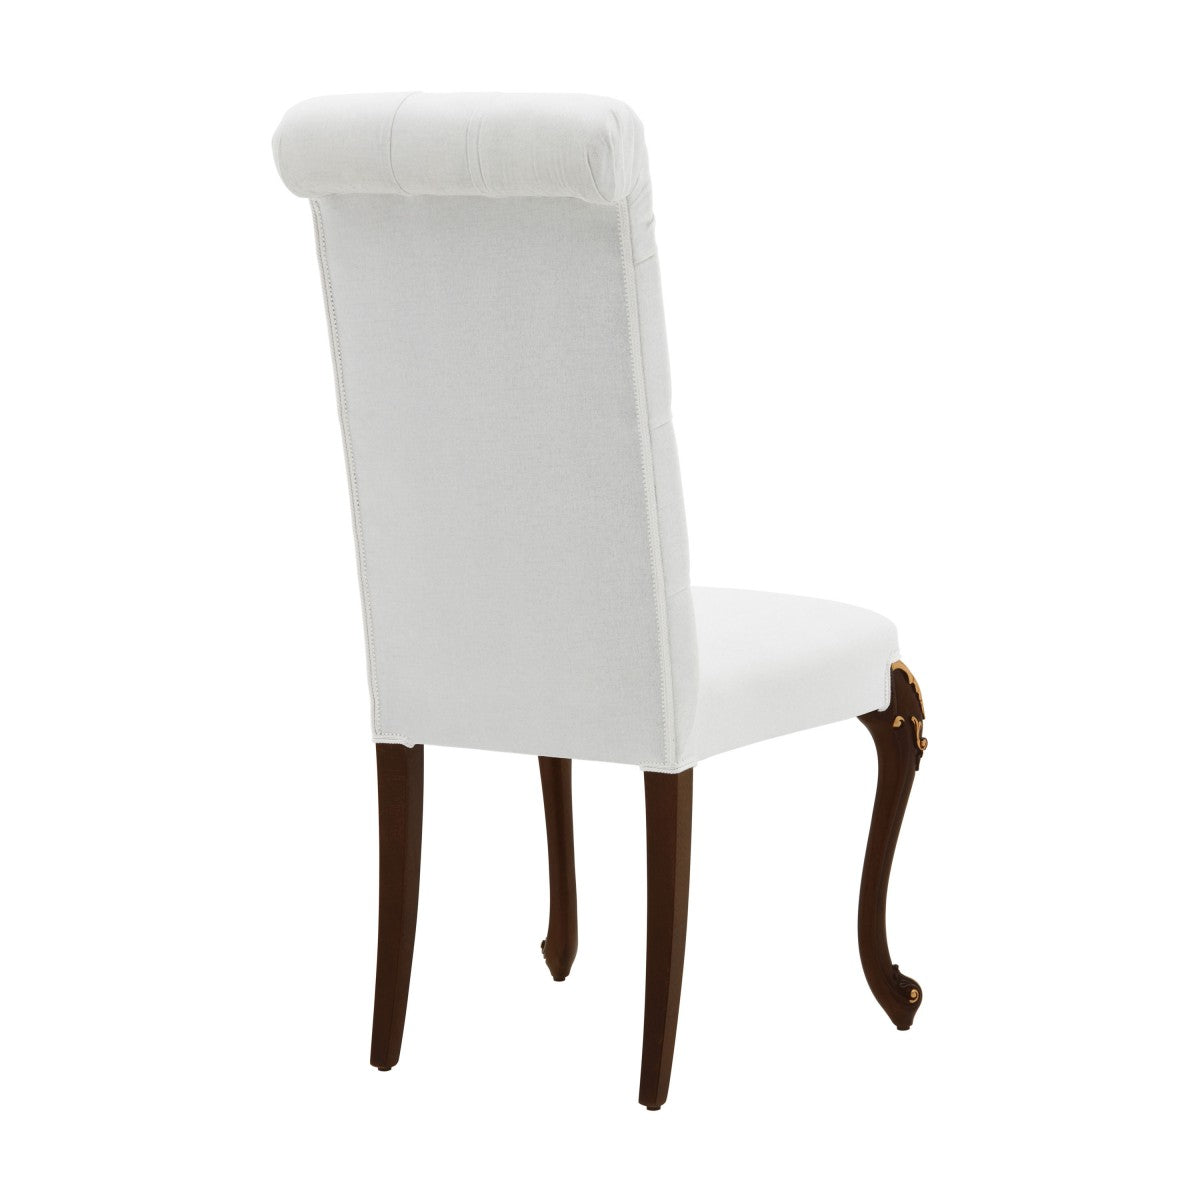 Serena Bespoke Upholstered Classic Style Dining Chair MS145S Custom Made To Order